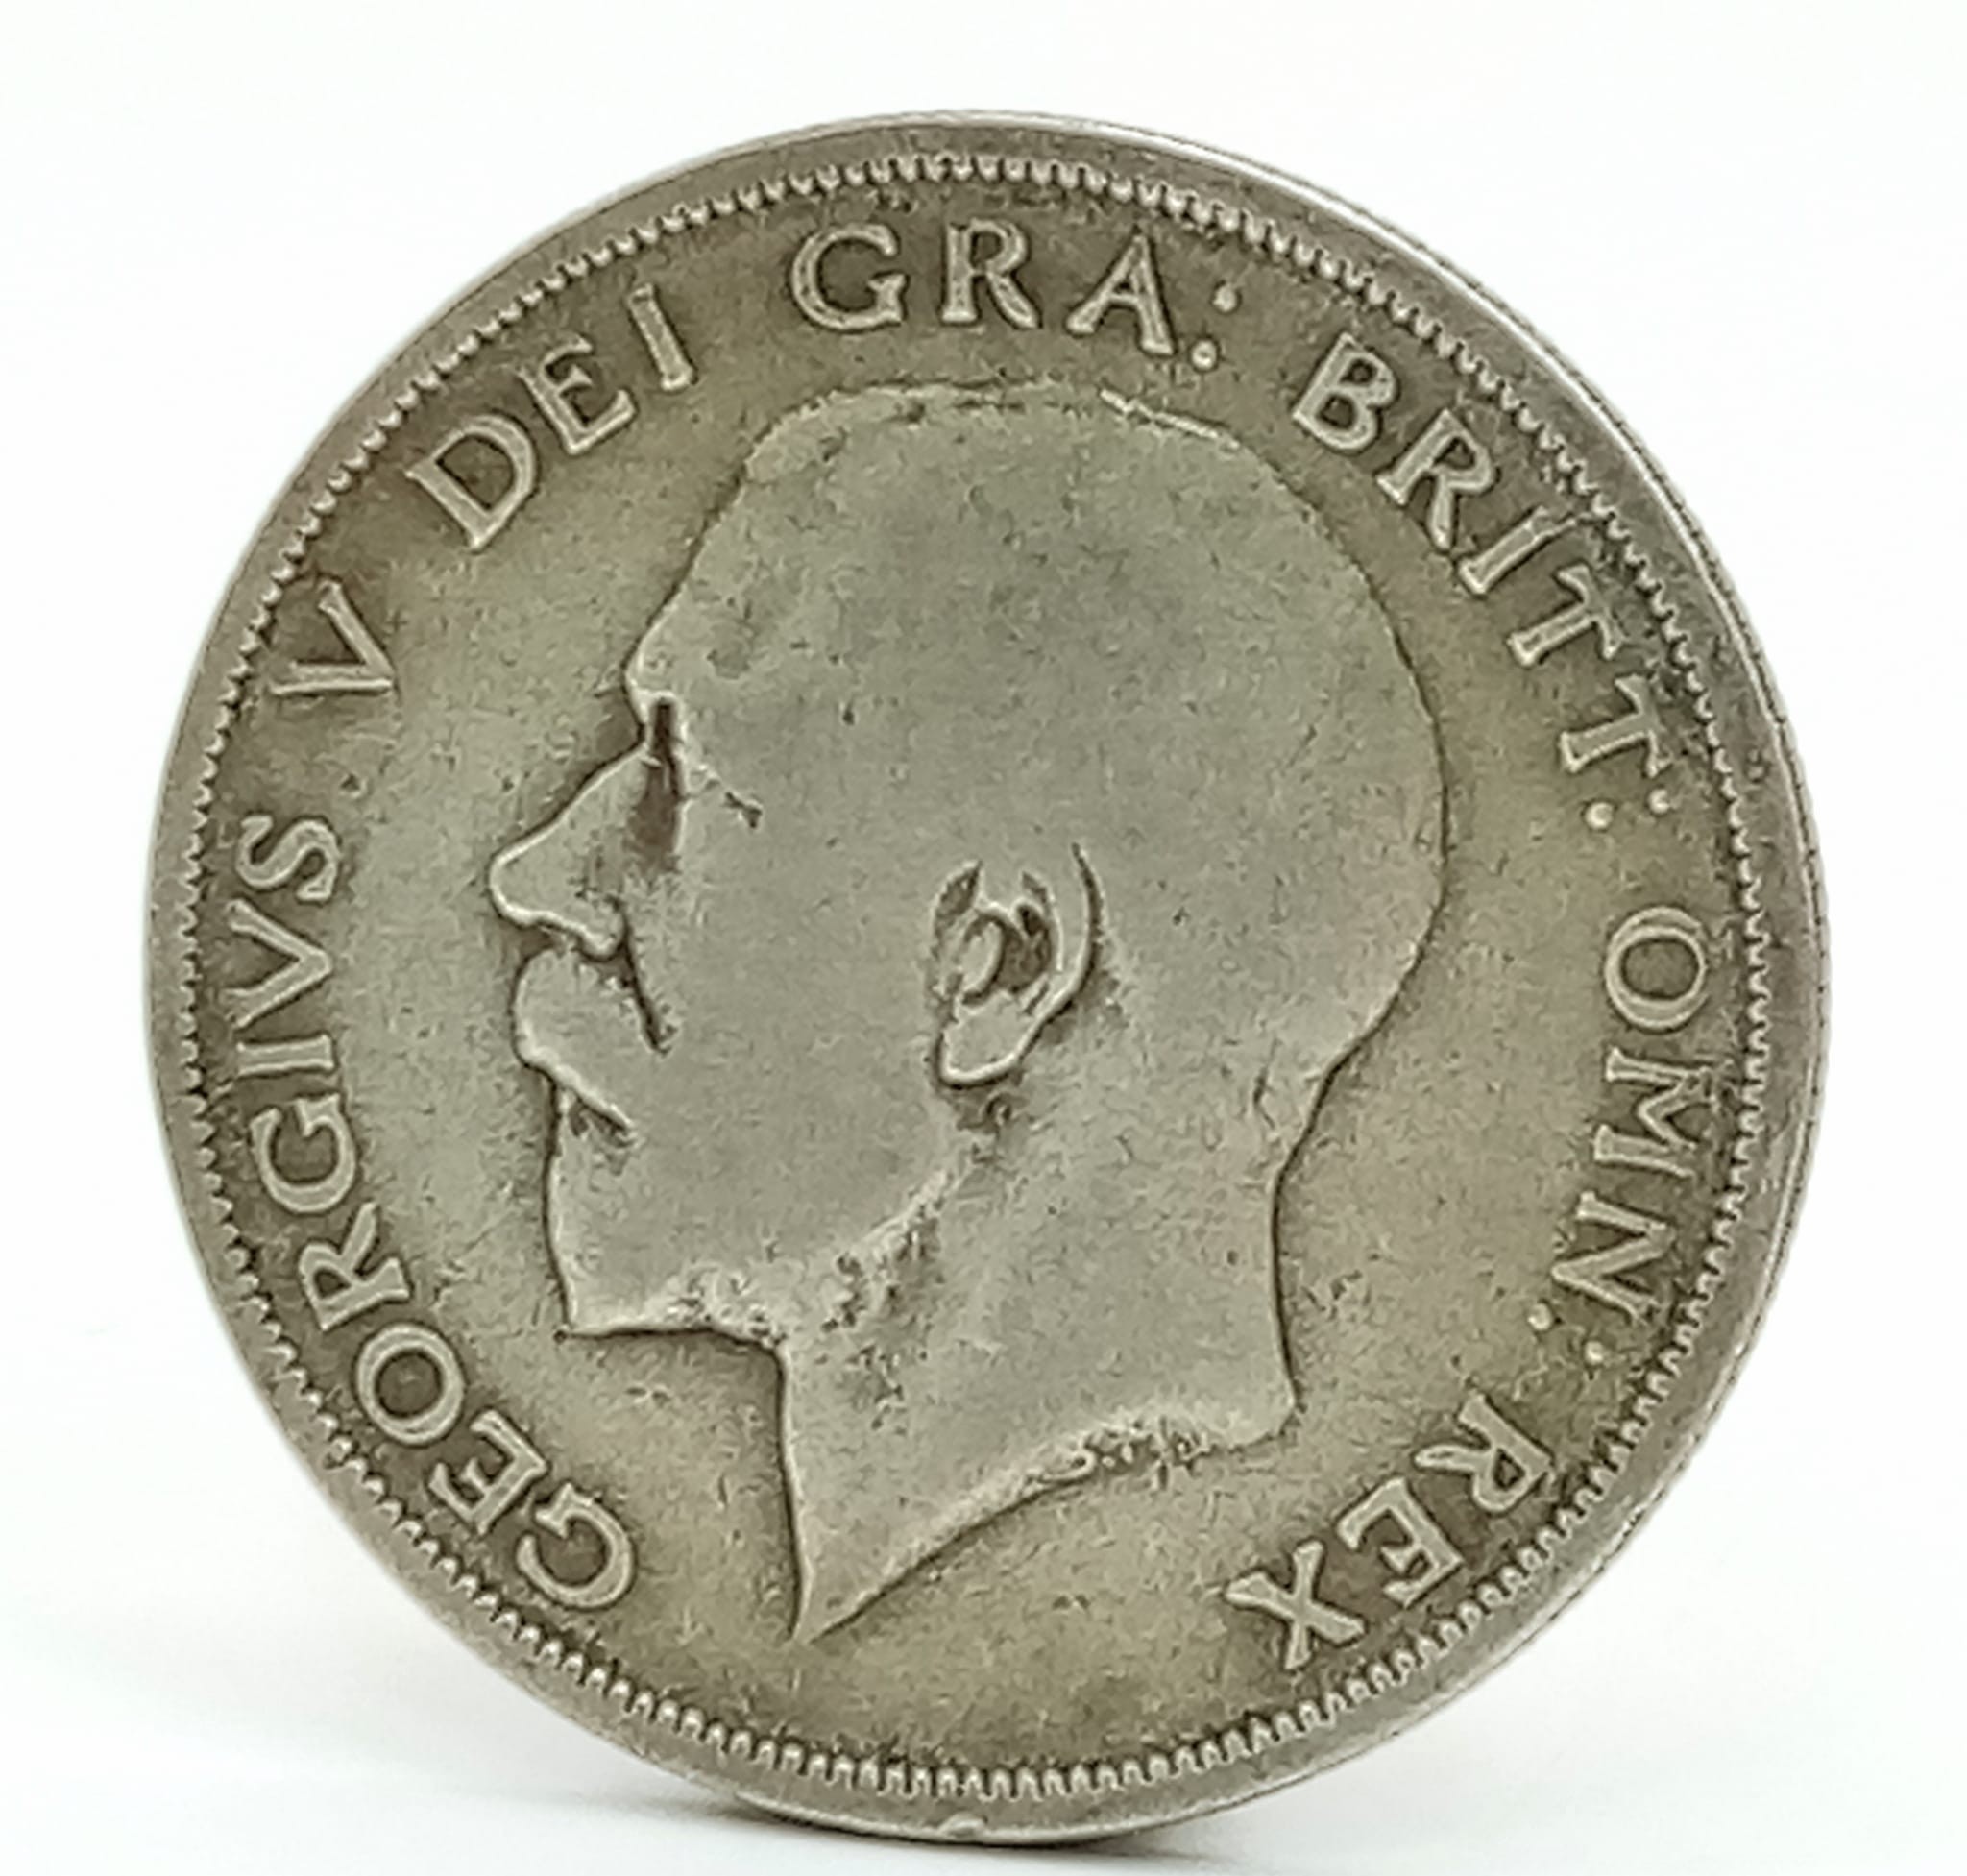 A 1920 Georgivs Half Crown. Please see photos for condition.